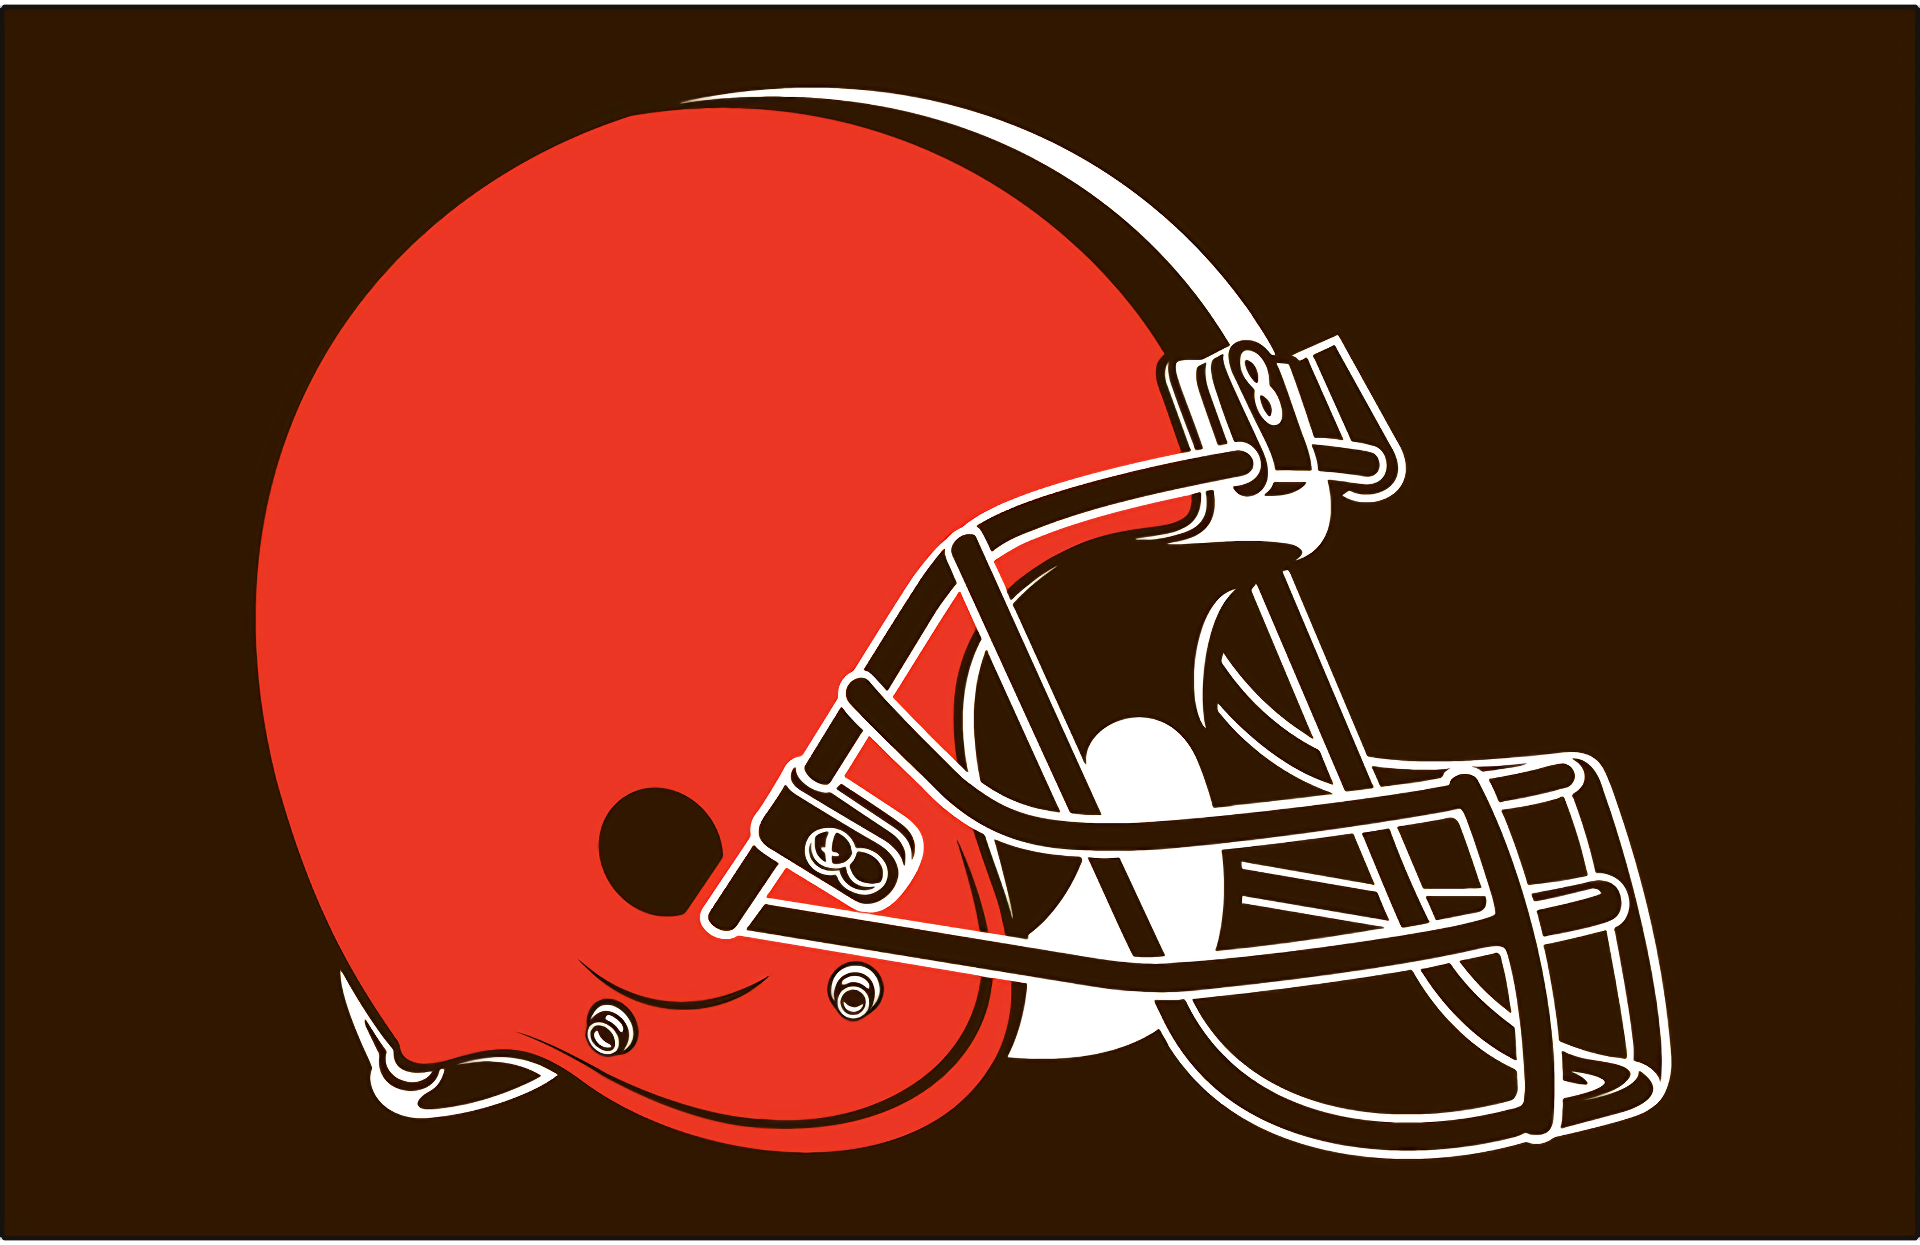 HD Cleveland Browns Wallpapers - 2023 NFL Football Wallpapers